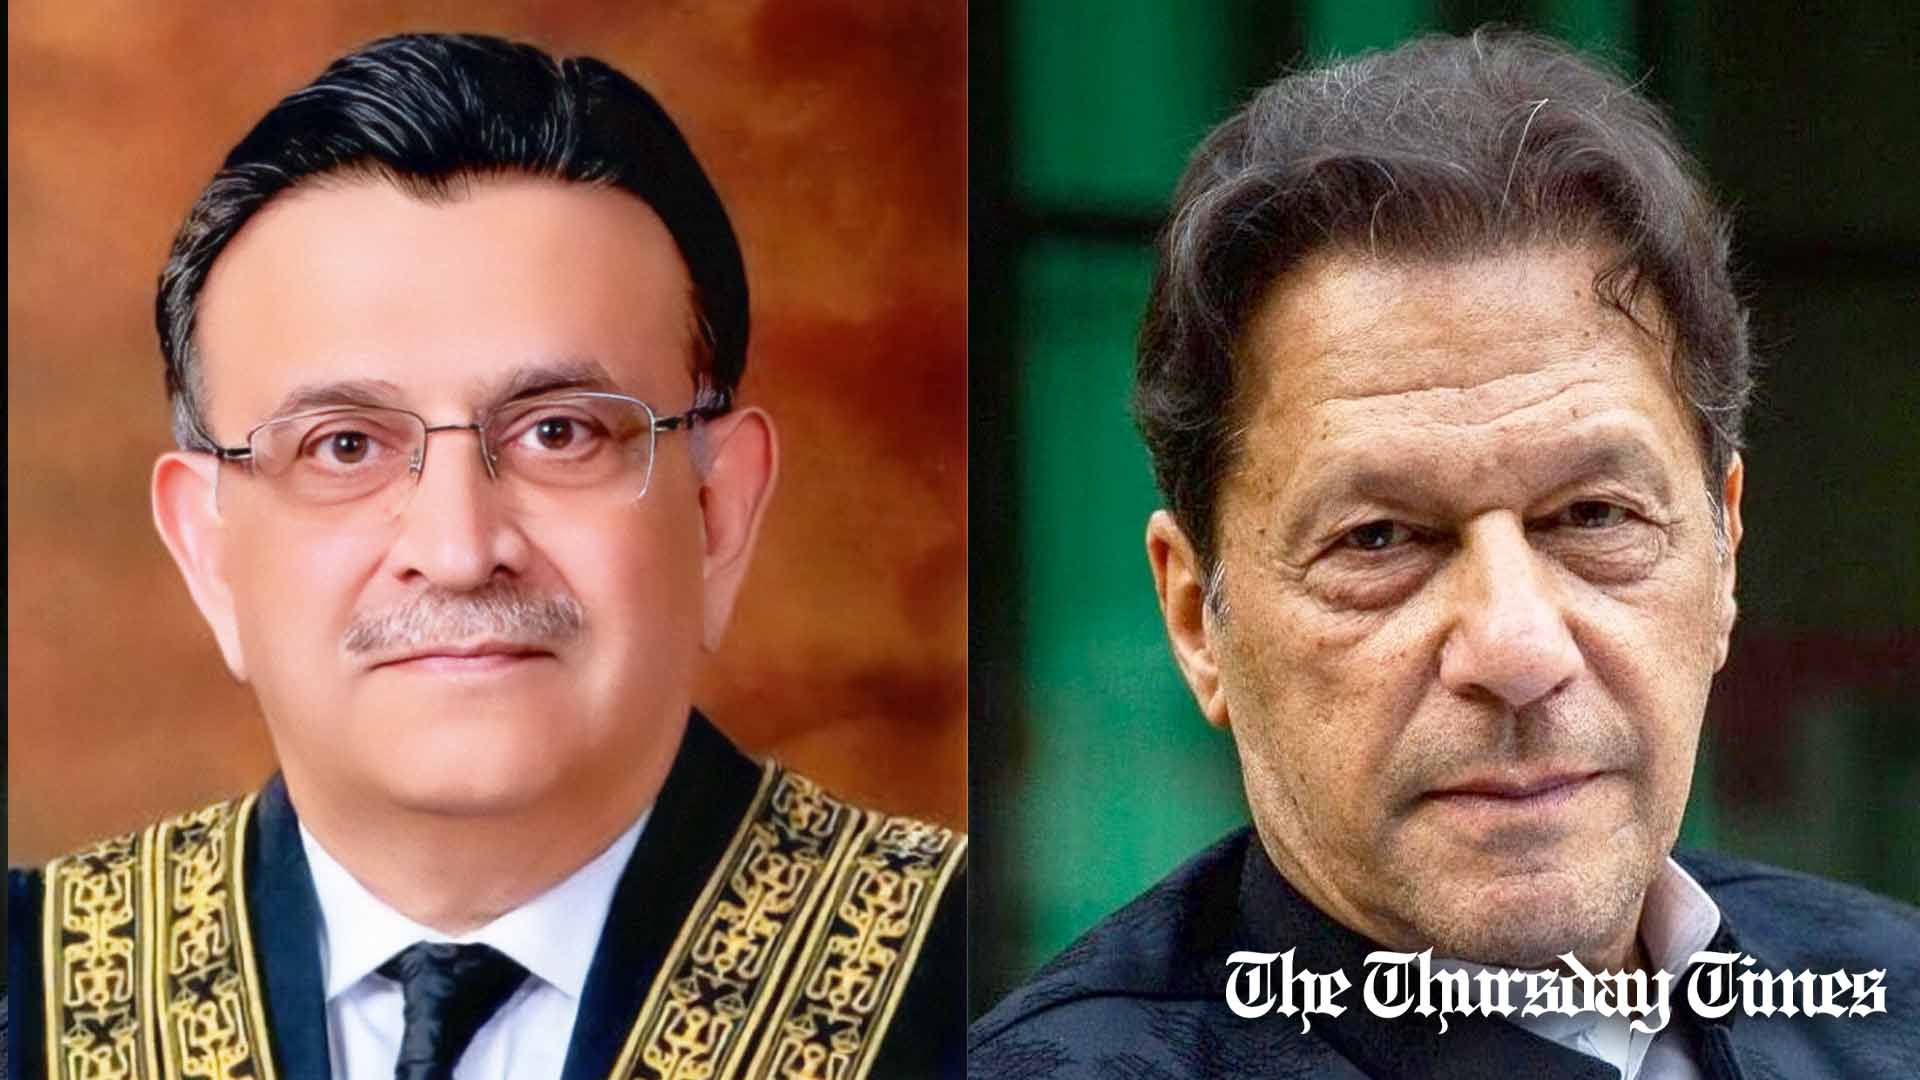 A combination file photo is shown of Chief Justice of the Supreme Court of Pakistan Umar Ata Bandial (L) alongside PTI chairman Imran Khan (R). — FILE/THE THURSDAY TIMES